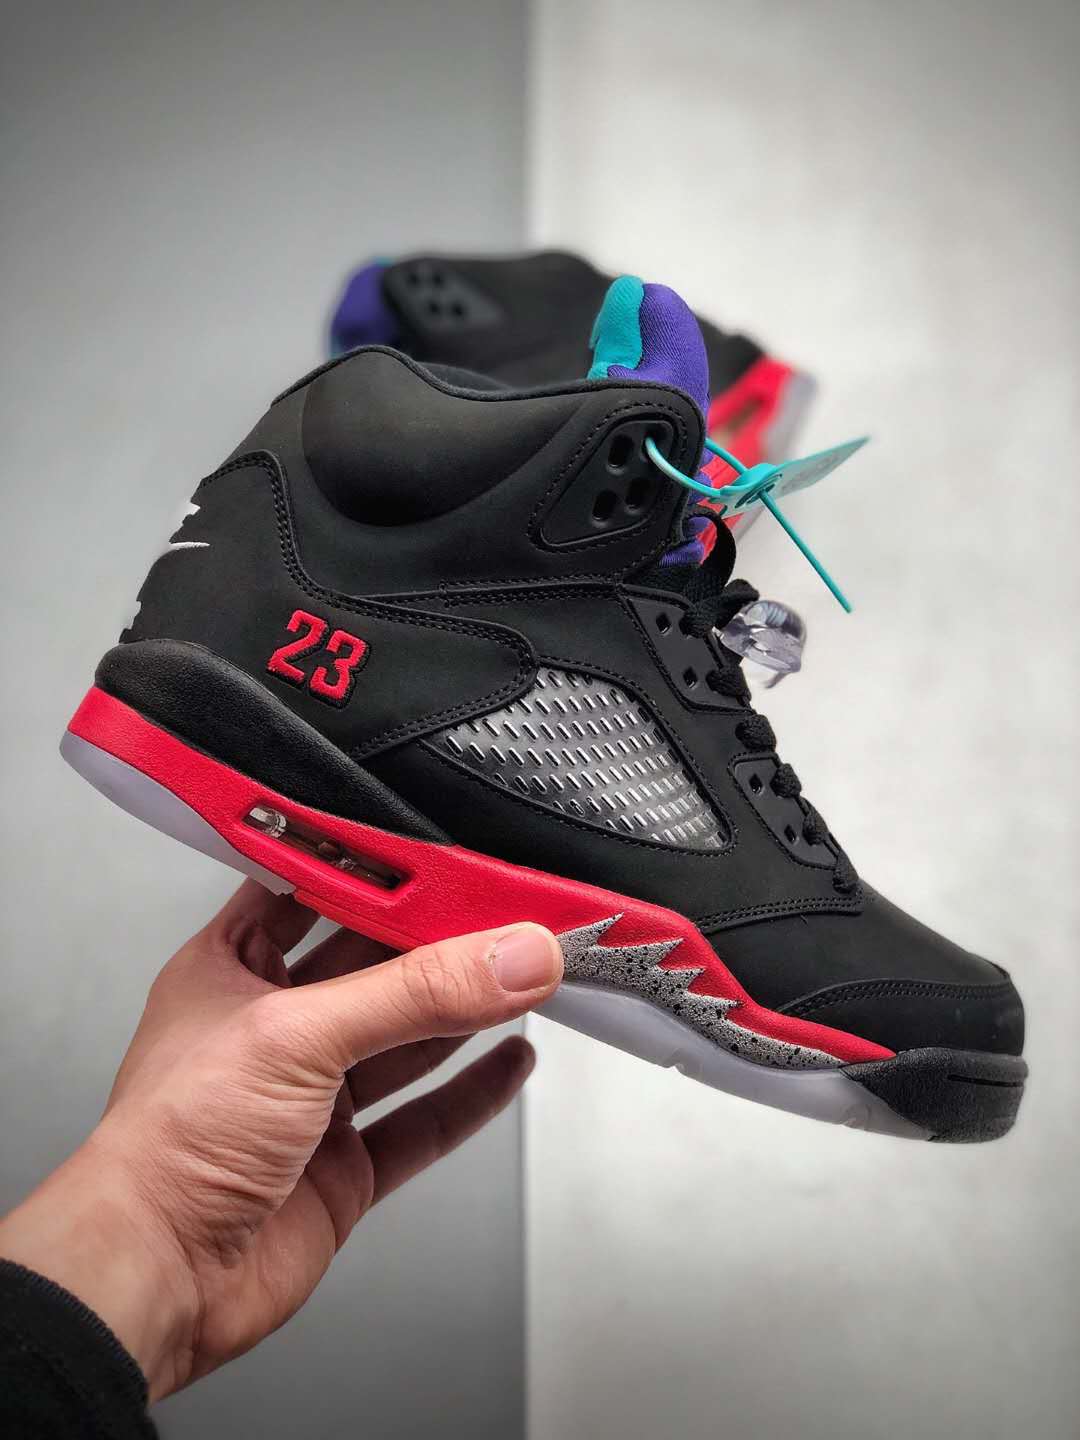 Air Jordan 5 Retro 'Top 3' CZ1786-001 - Iconic Style and Unmatched Performance